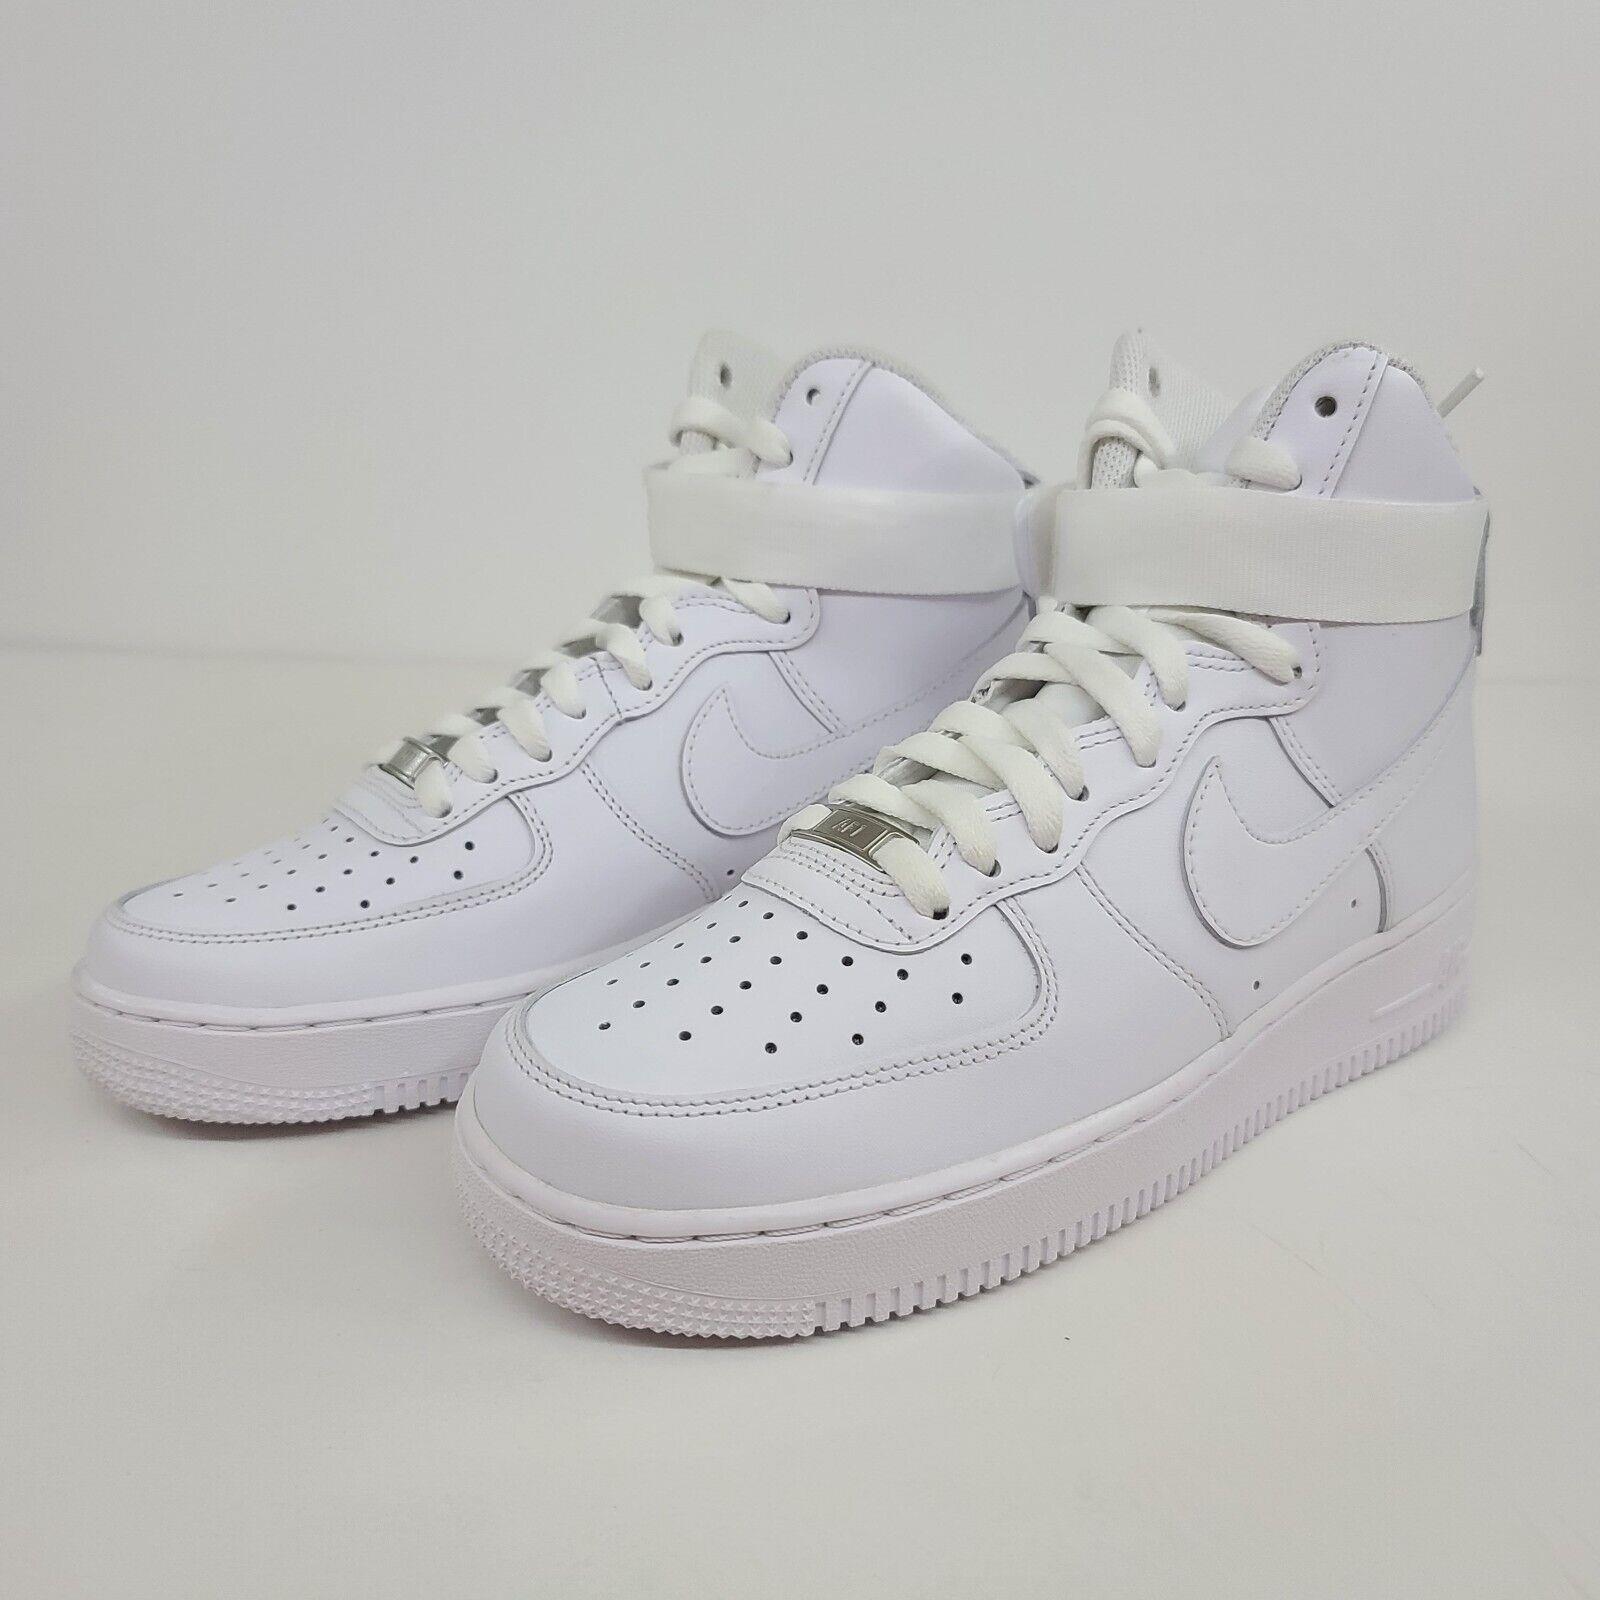 in stadium promotions Nike Air Force 1 High White CW2290-111 Size 10M ...